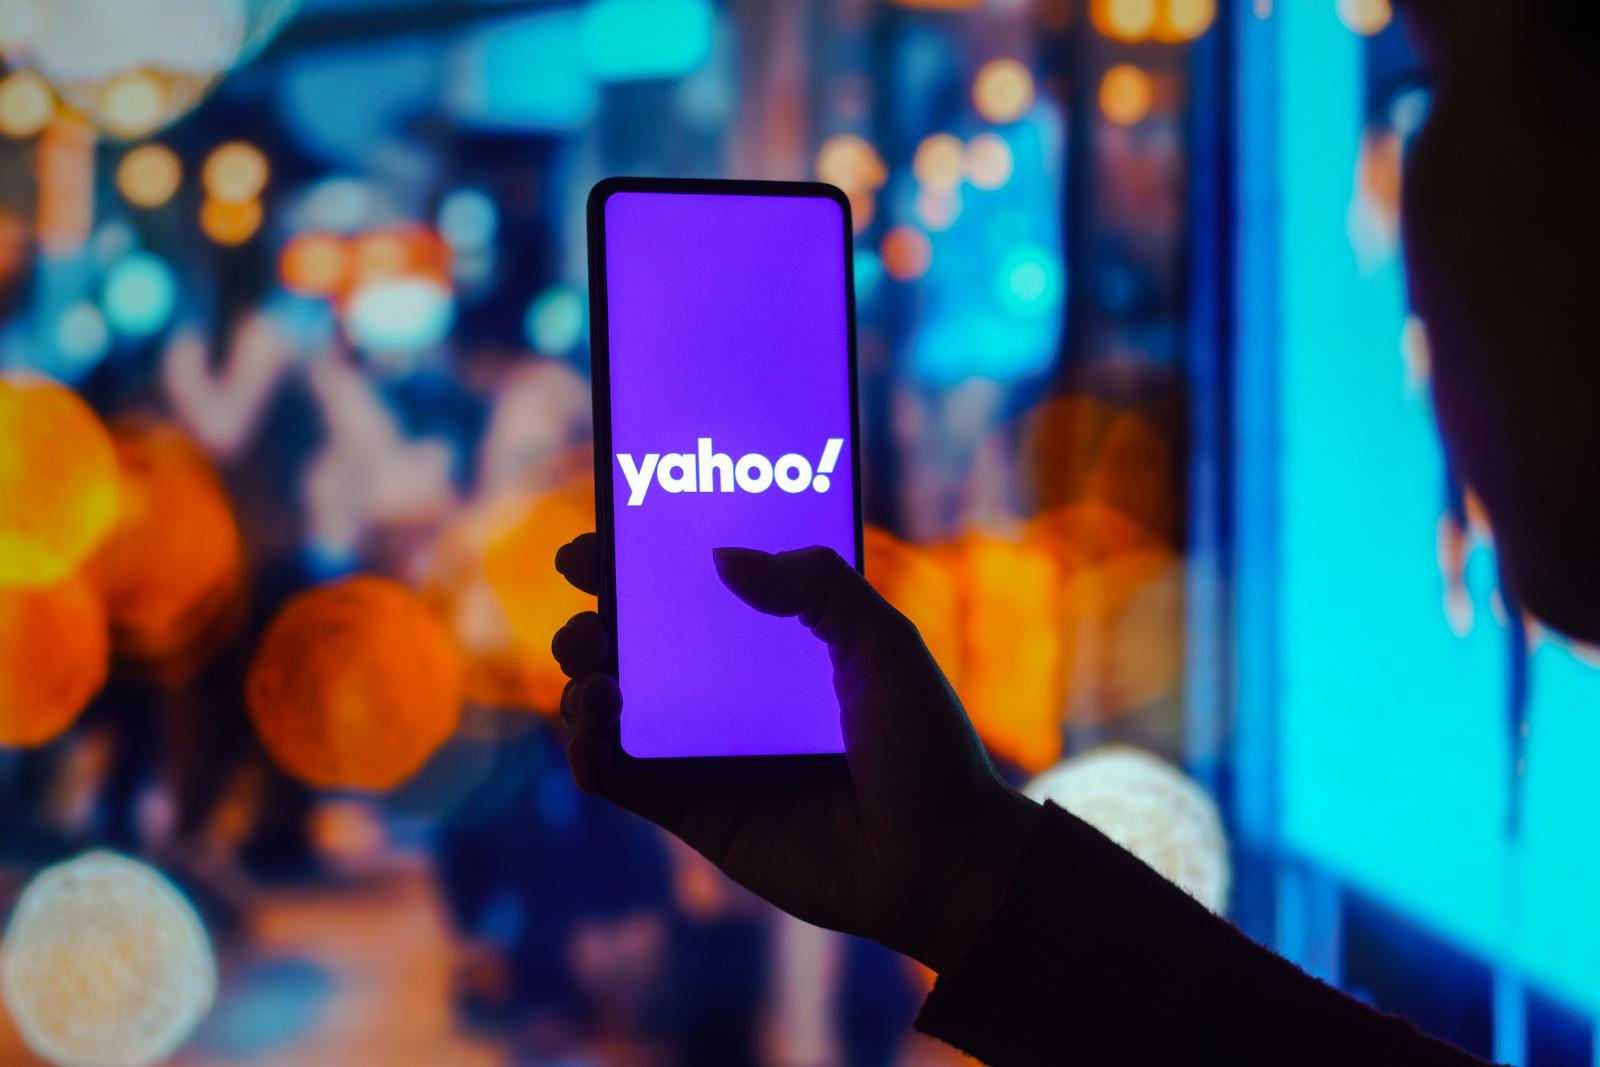 Yahoo Mail introduces new AI-powered capabilities, including a ‘Shopping Saver’ tool